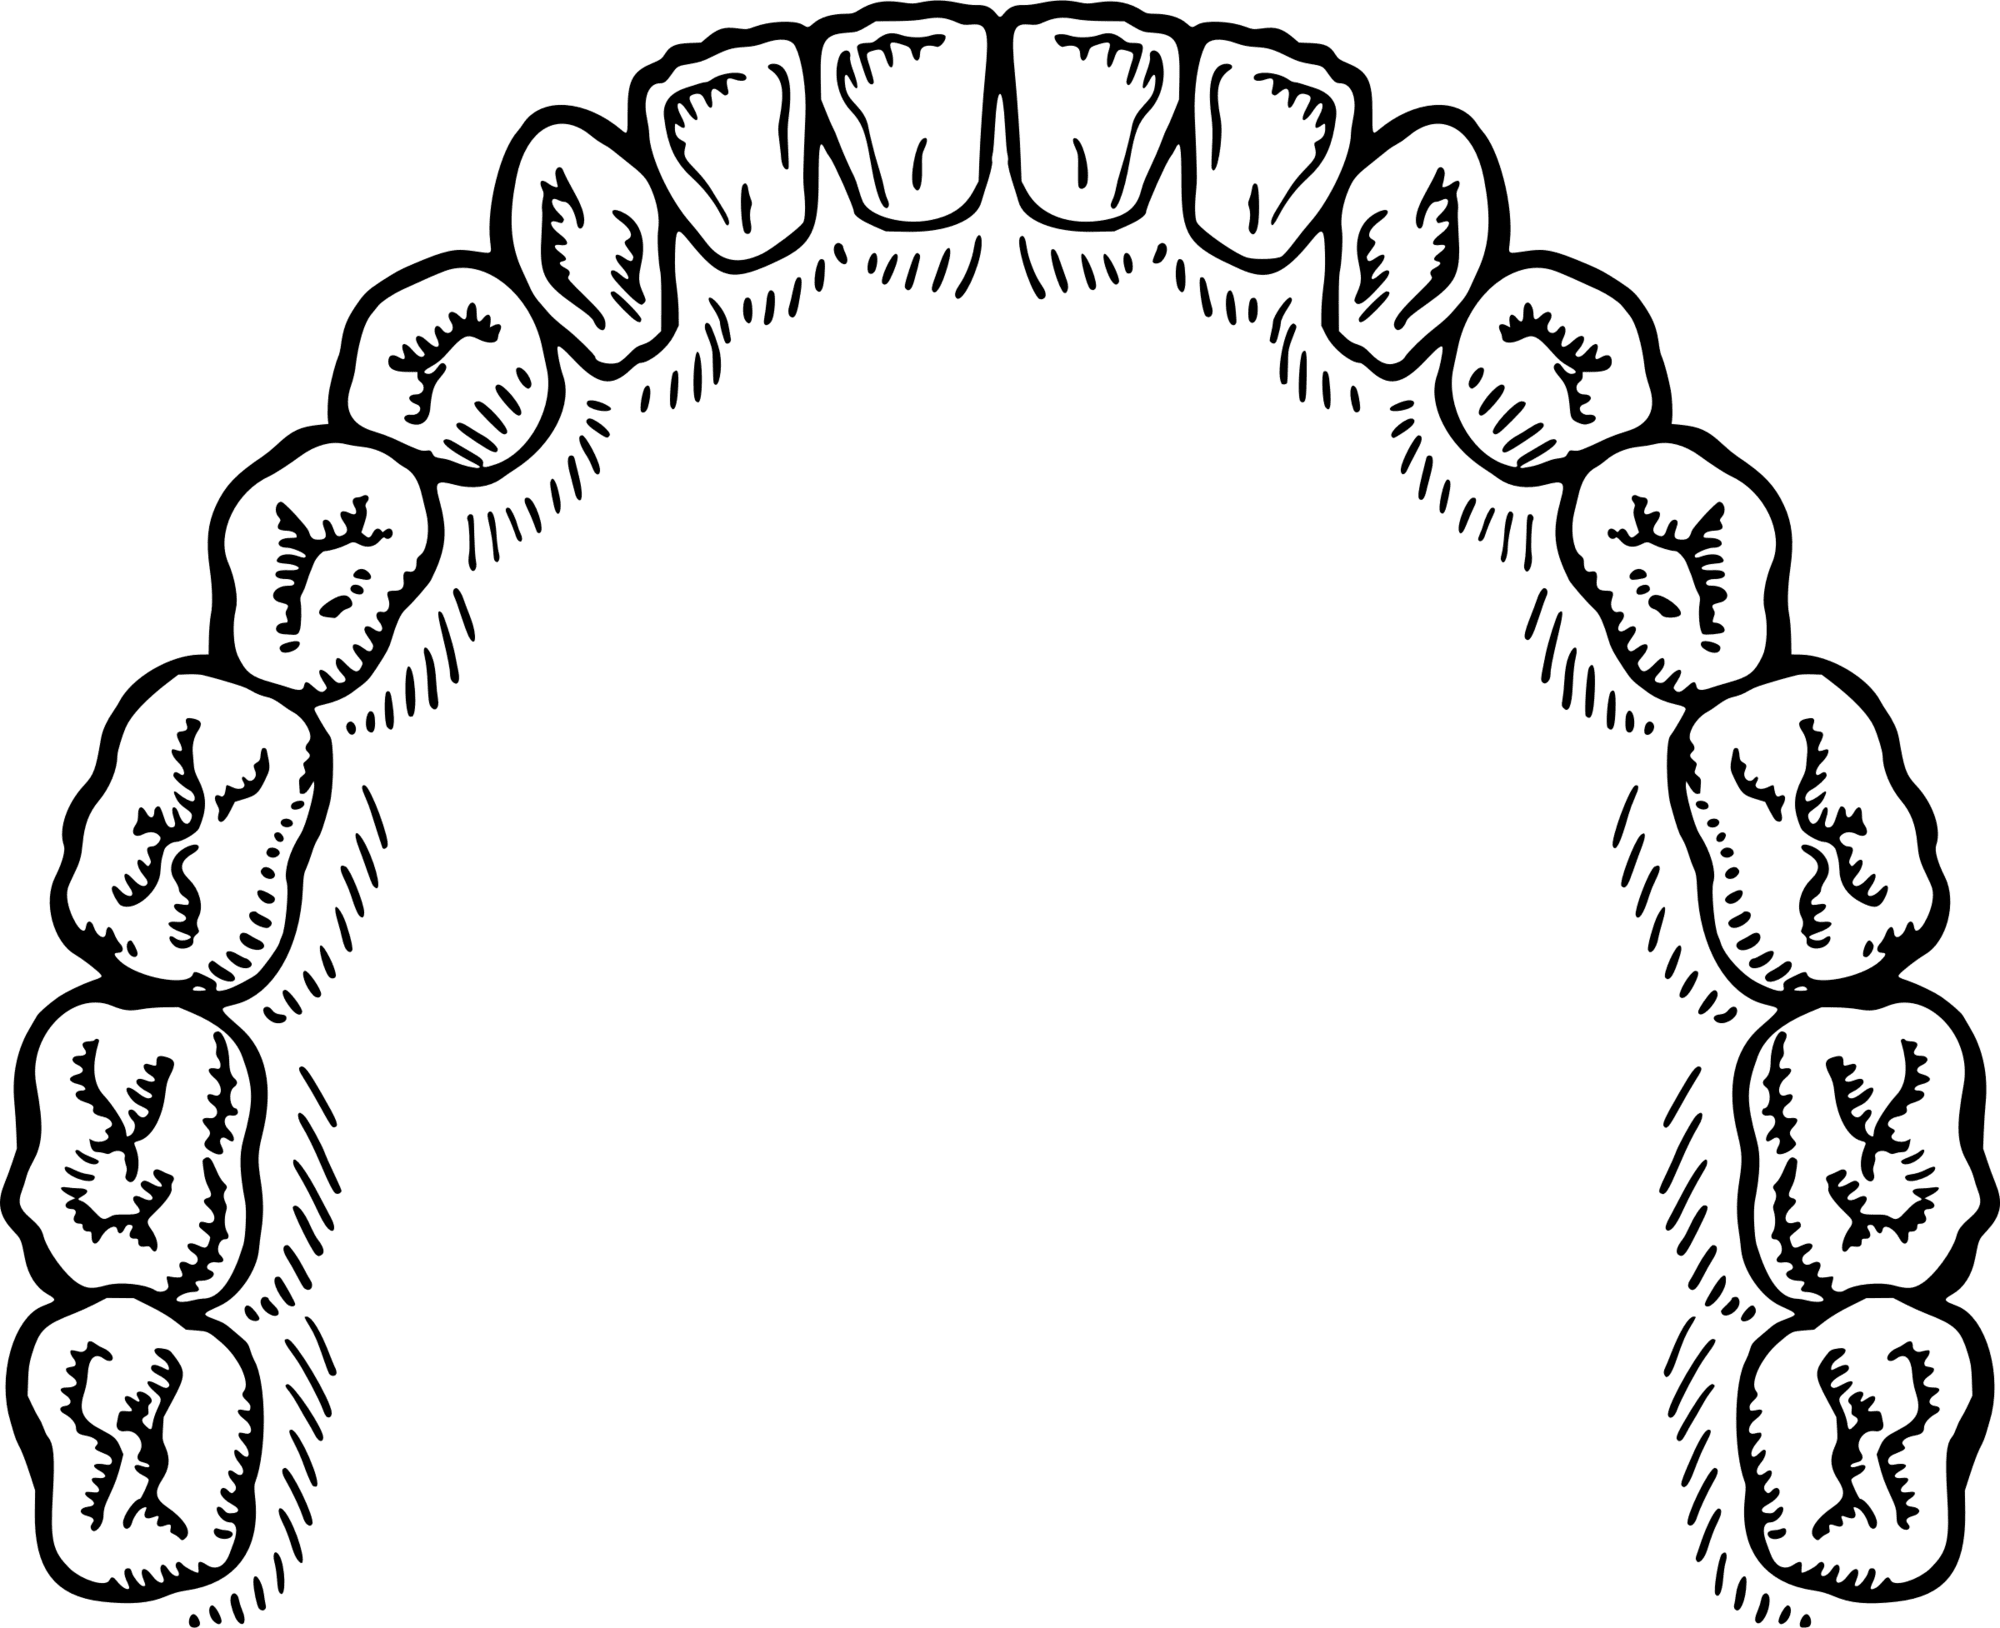 Mouth of teeth vector clipart image photo